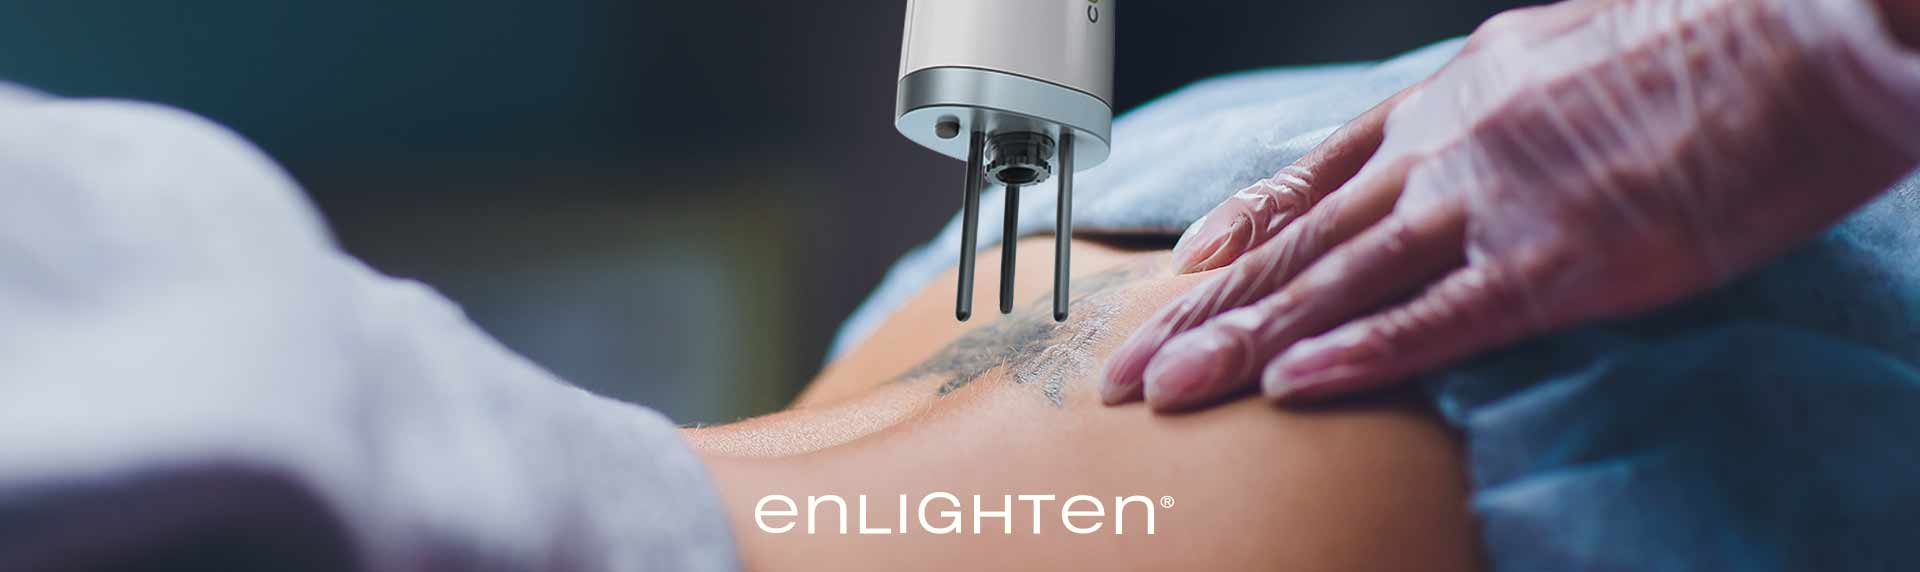 Enlighten By Cutera The Best Laser Tattoo Removal How It Works  Elite  Body and Laser